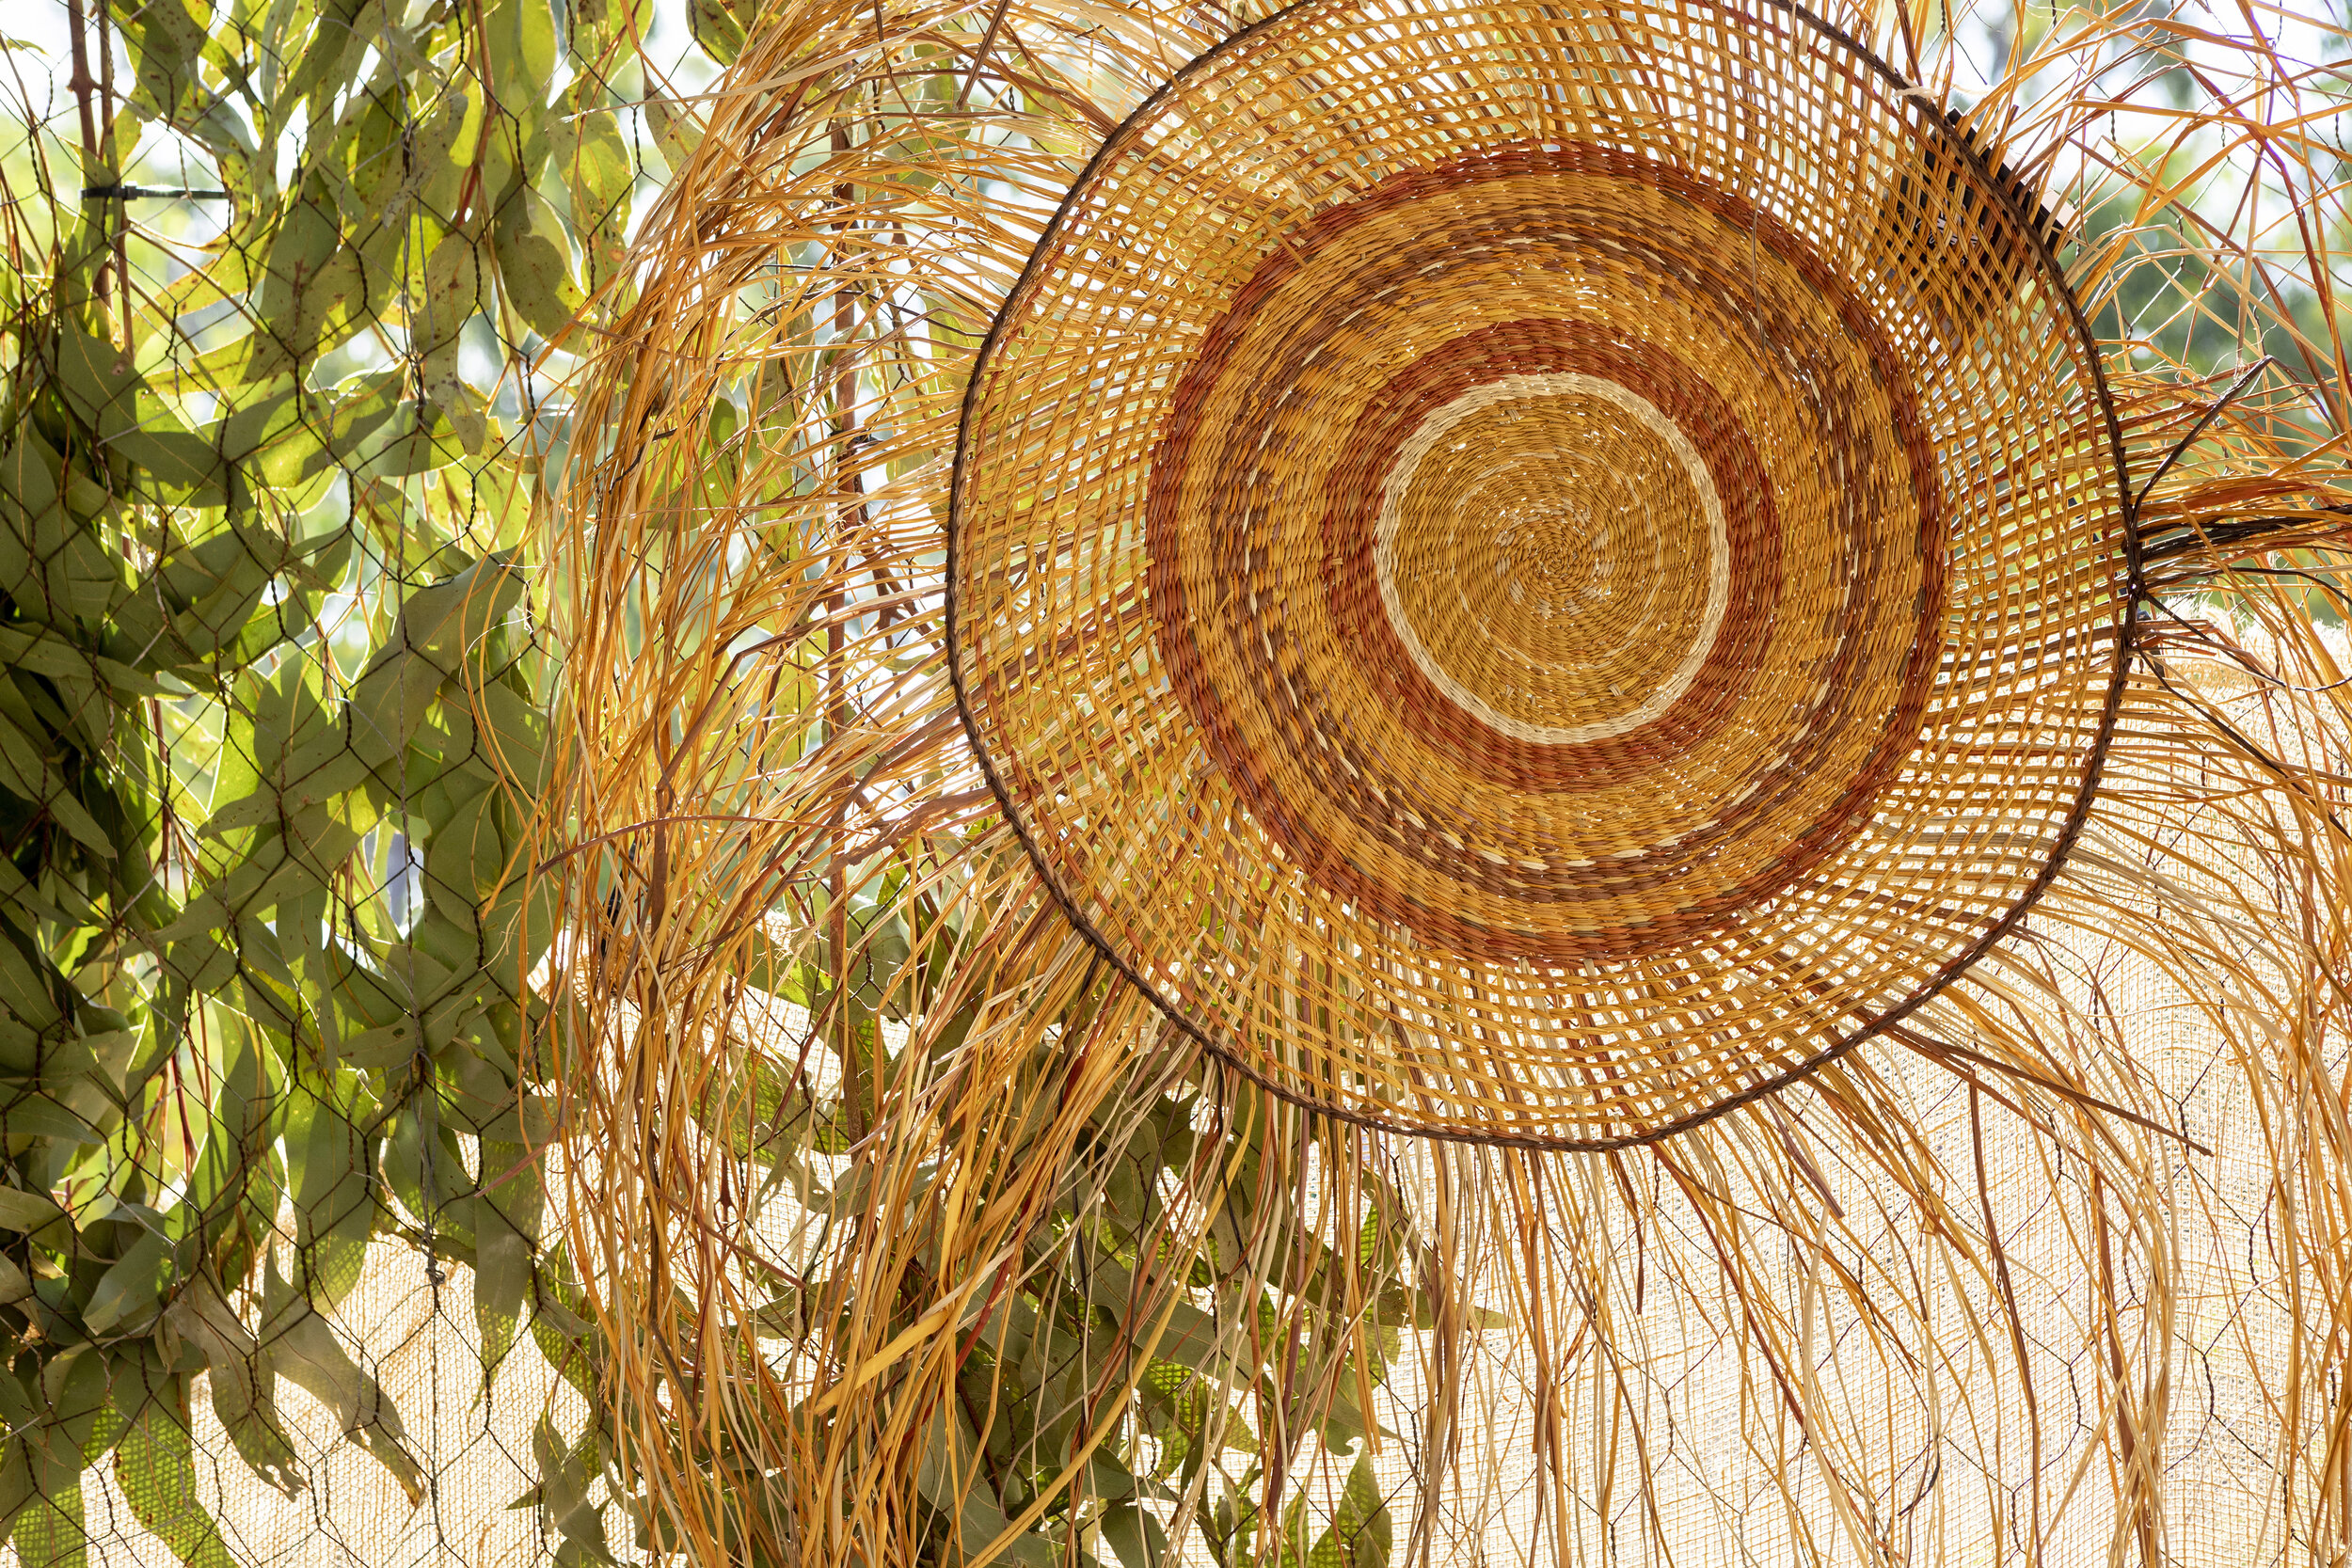  Skilled  Yolngu  artisans create beautiful, naturally-dyed, hand-woven pieces out of pandanus leaves. 